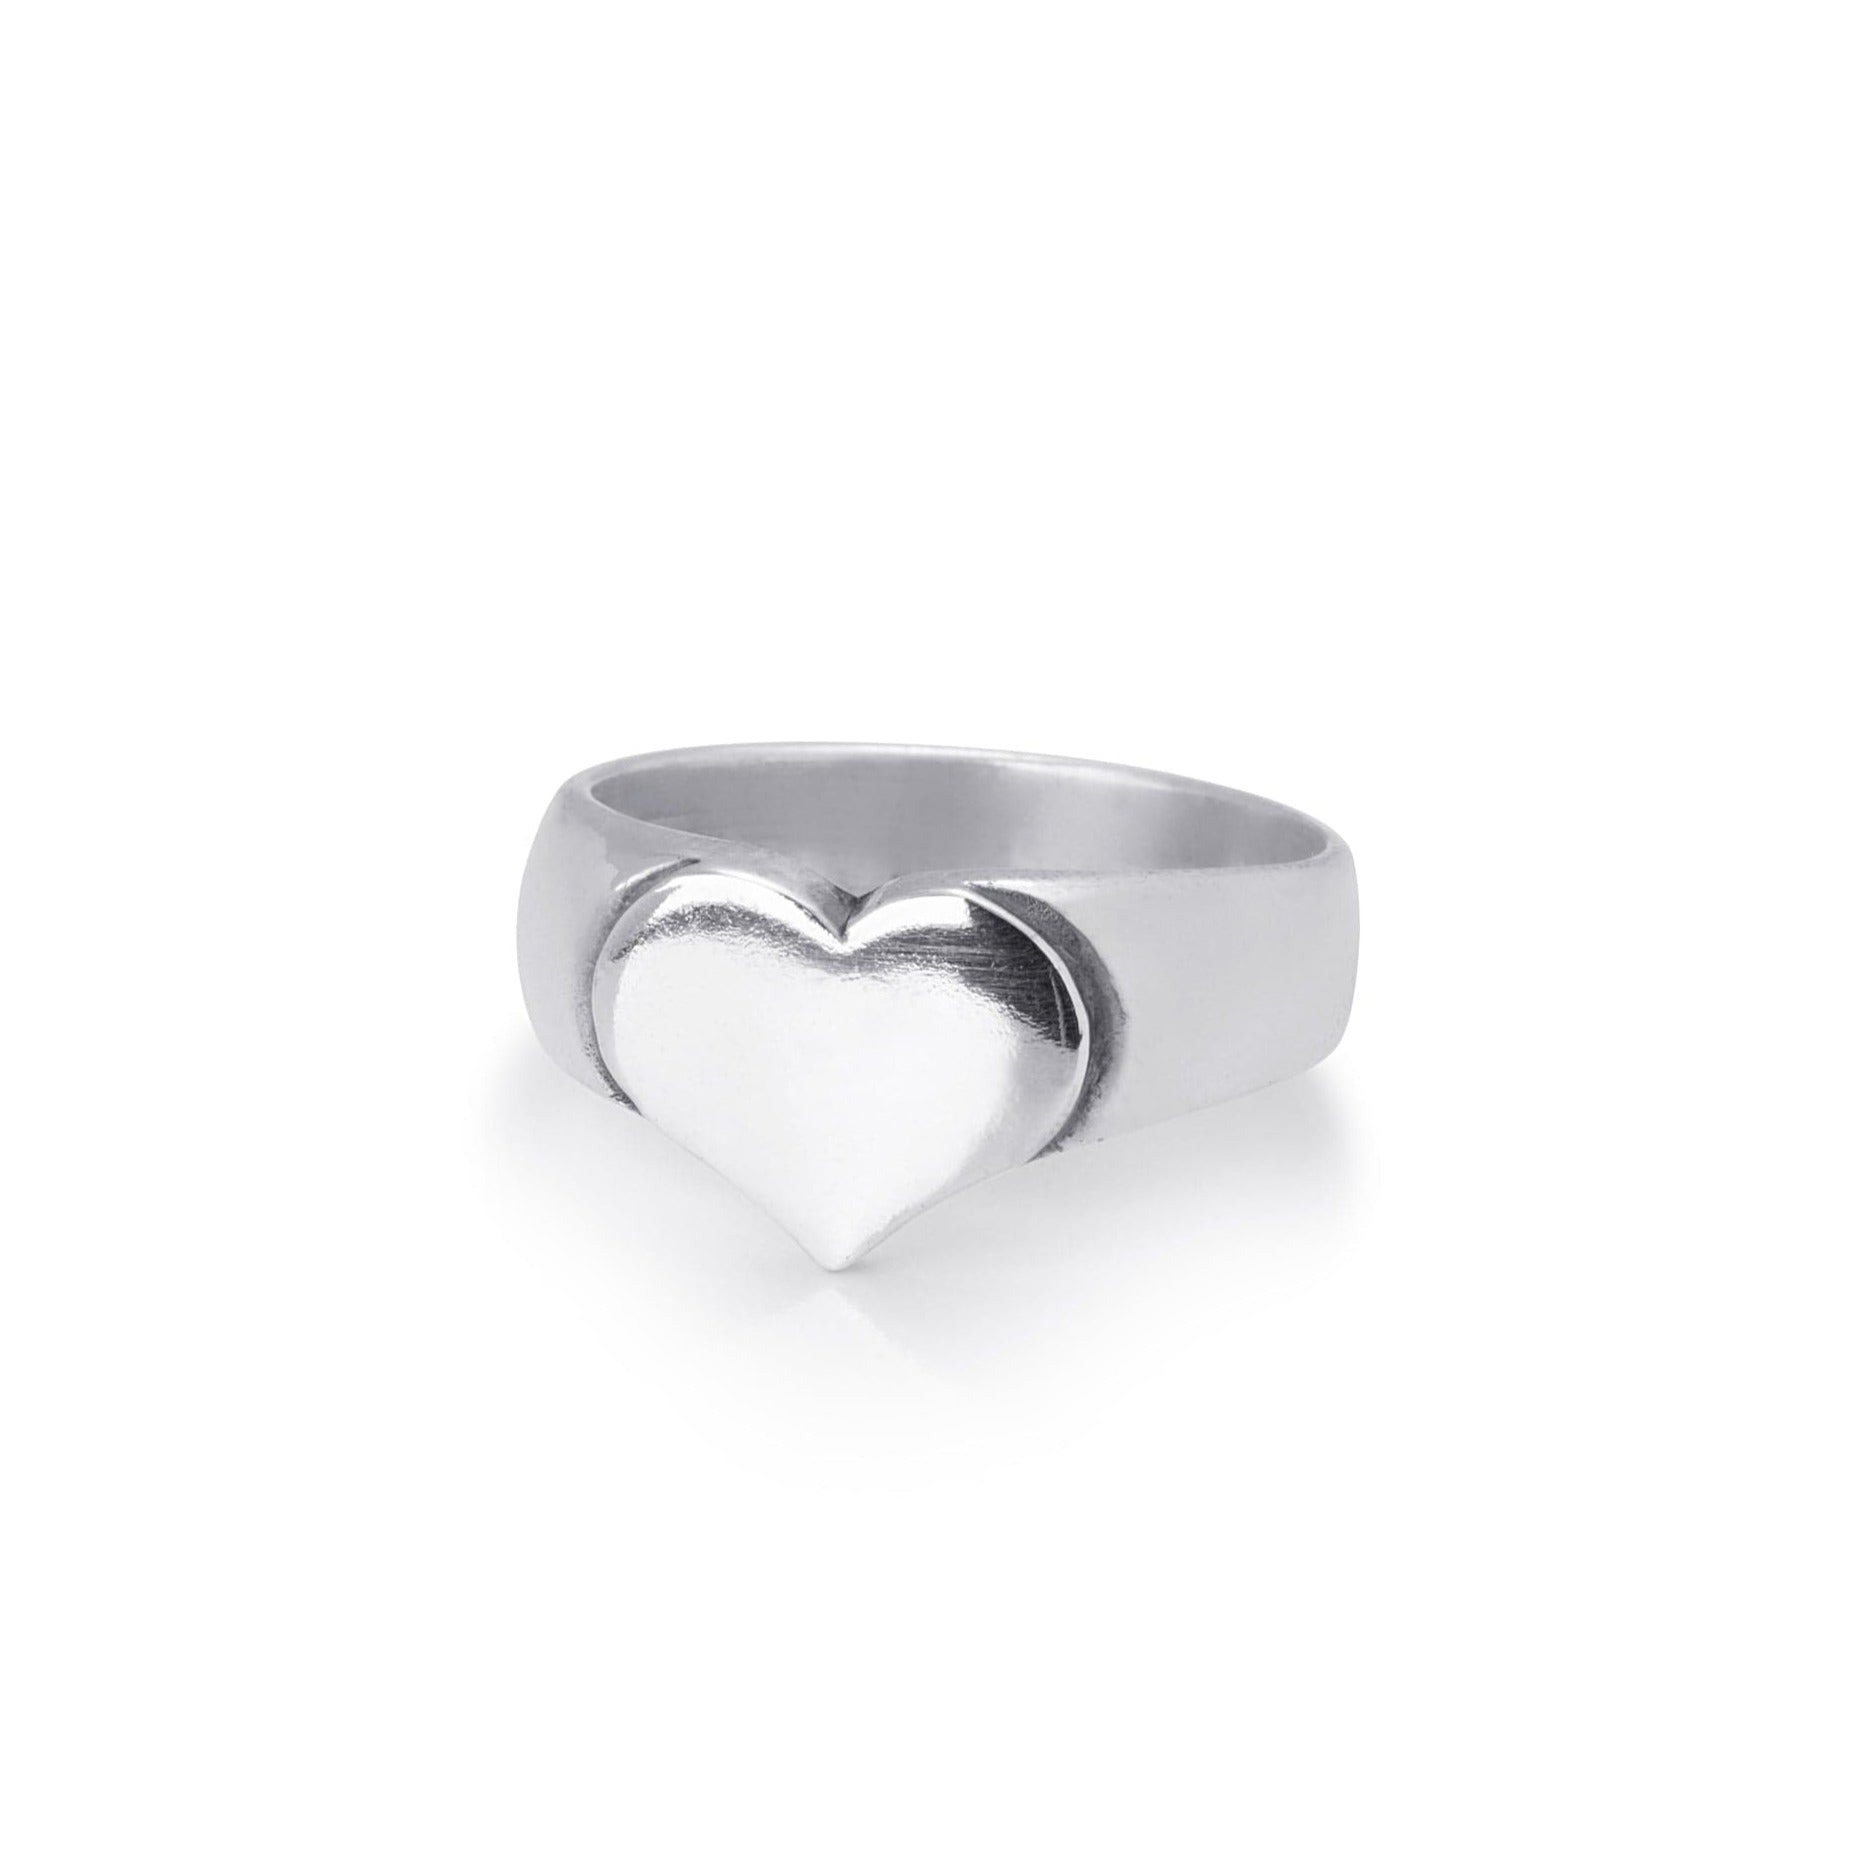 Bloodline Design Canada Womens Rings NEW heart ring